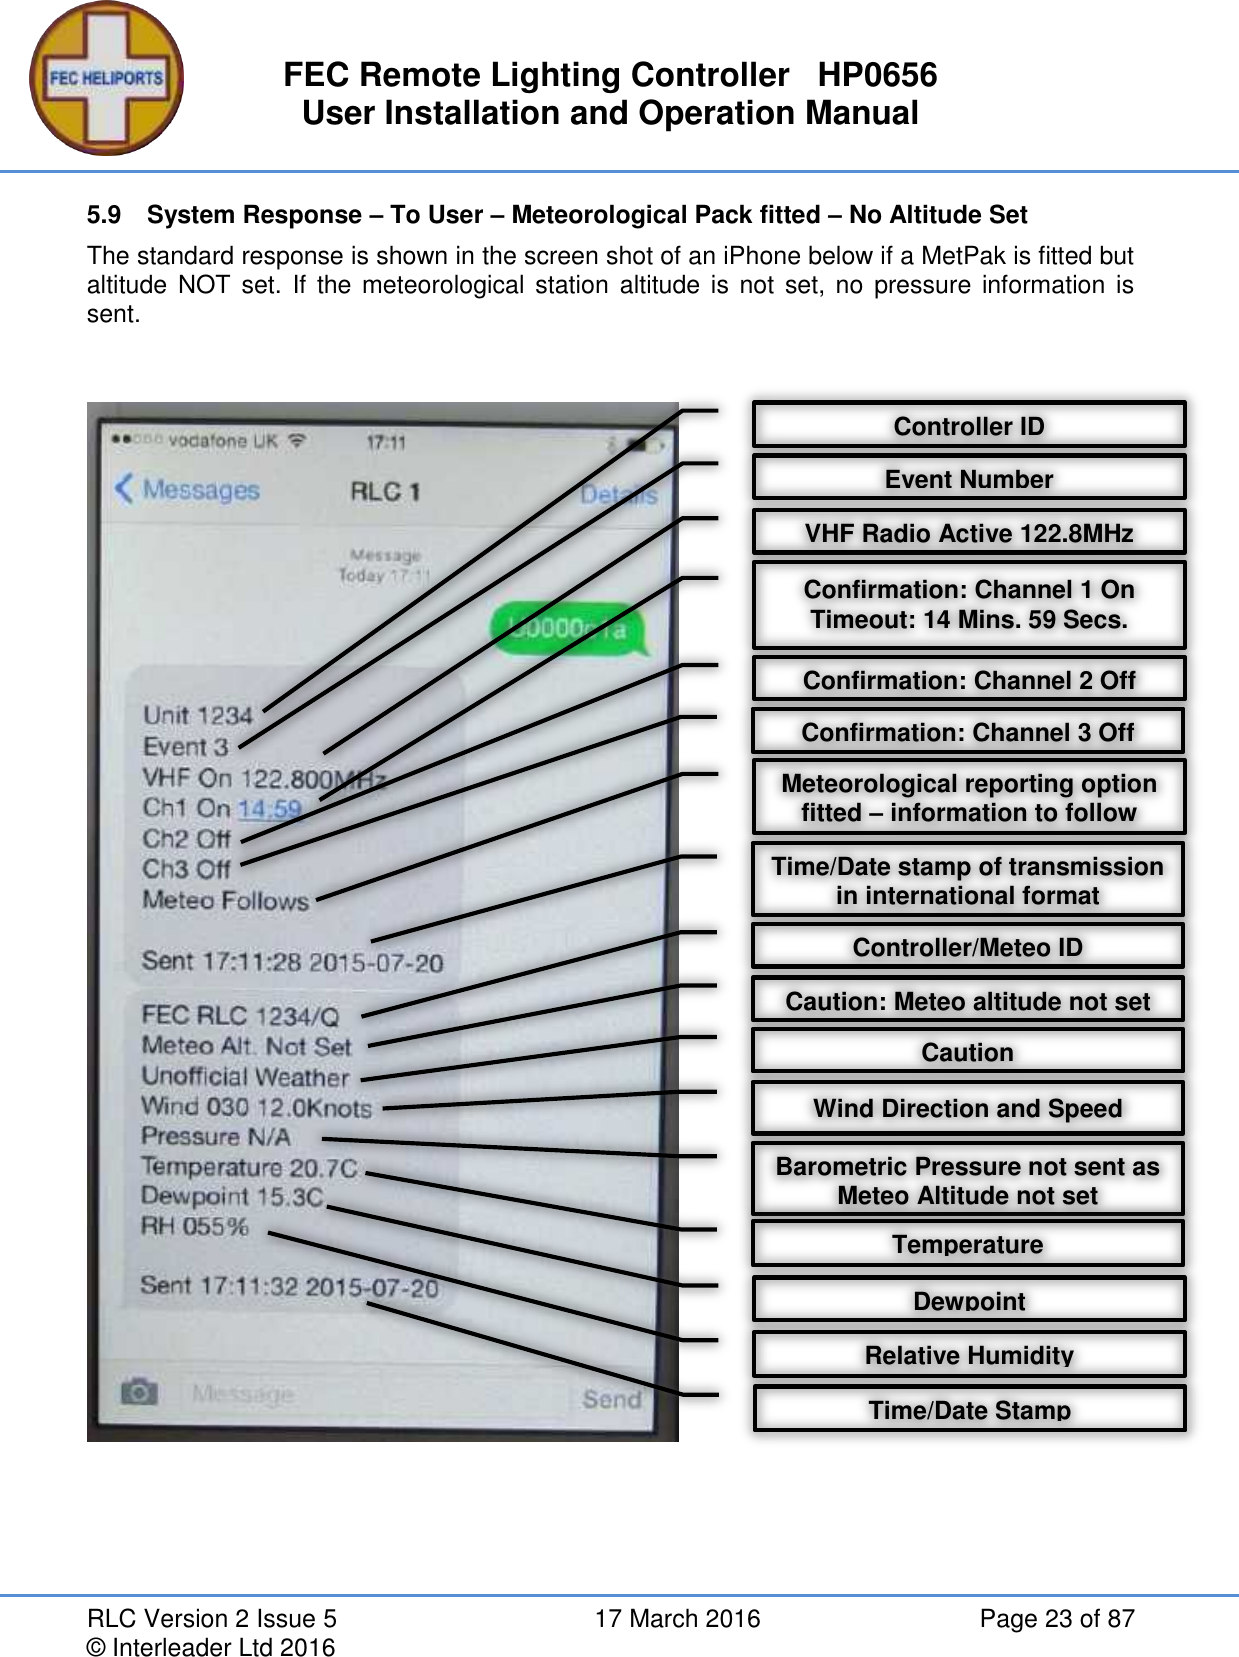 FEC Remote Lighting Controller   HP0656 User Installation and Operation Manual RLC Version 2 Issue 5  17 March 2016  Page 23 of 87 © Interleader Ltd 2016 5.9  System Response – To User – Meteorological Pack fitted – No Altitude Set  The standard response is shown in the screen shot of an iPhone below if a MetPak is fitted but altitude NOT set. If  the meteorological station altitude is  not  set, no  pressure  information is sent.       Controller ID VHF Radio Active 122.8MHz Confirmation: Channel 1 On Timeout: 14 Mins. 59 Secs. Confirmation: Channel 2 Off Meteorological reporting option fitted – information to follow Time/Date stamp of transmission in international format Confirmation: Channel 3 Off Controller/Meteo ID Caution Wind Direction and Speed Barometric Pressure not sent as Meteo Altitude not set Temperature Dewpoint Relative Humidity Time/Date Stamp Event Number Caution: Meteo altitude not set 